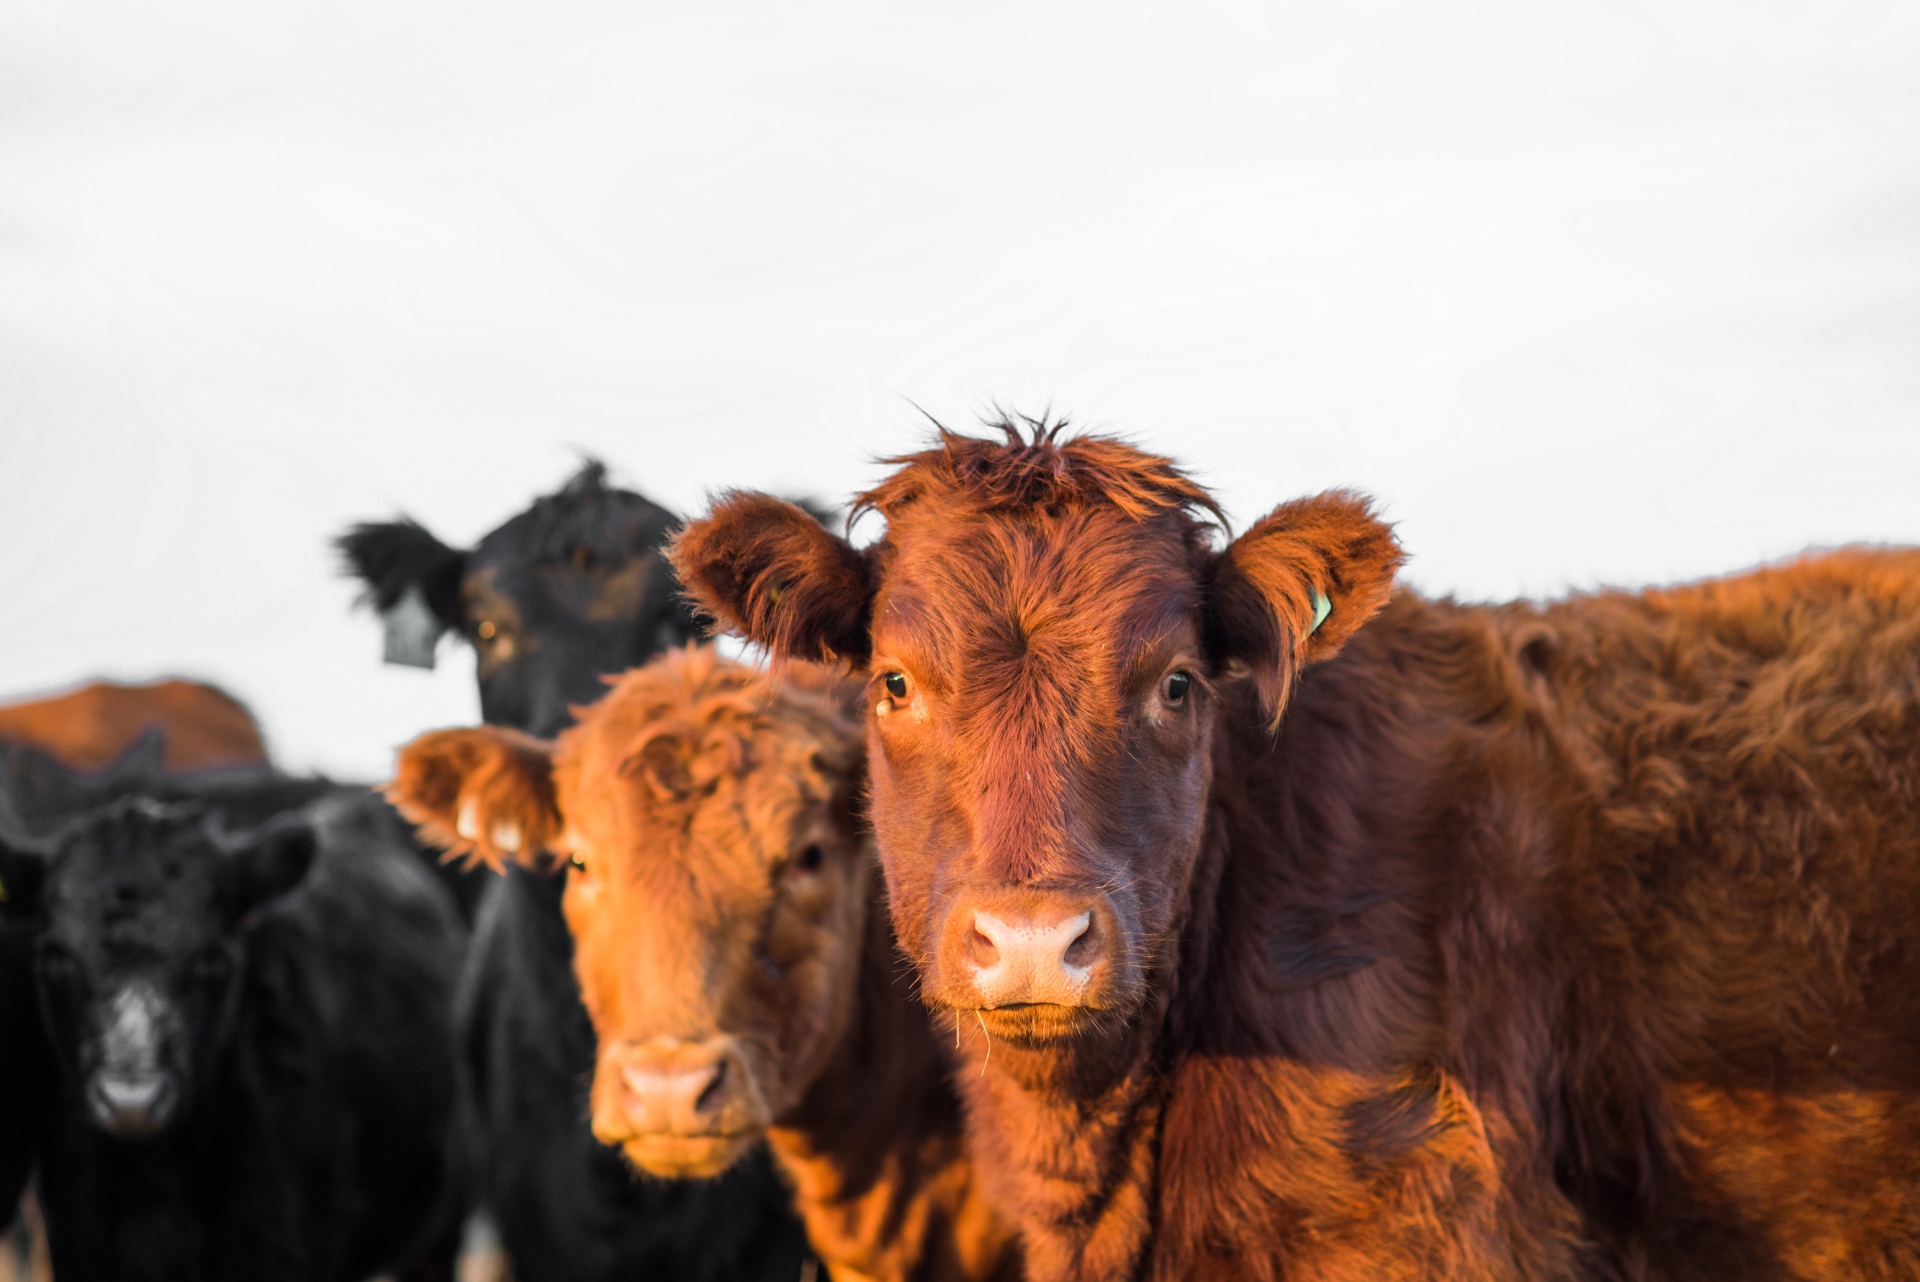 Image of cows looking at the camera.